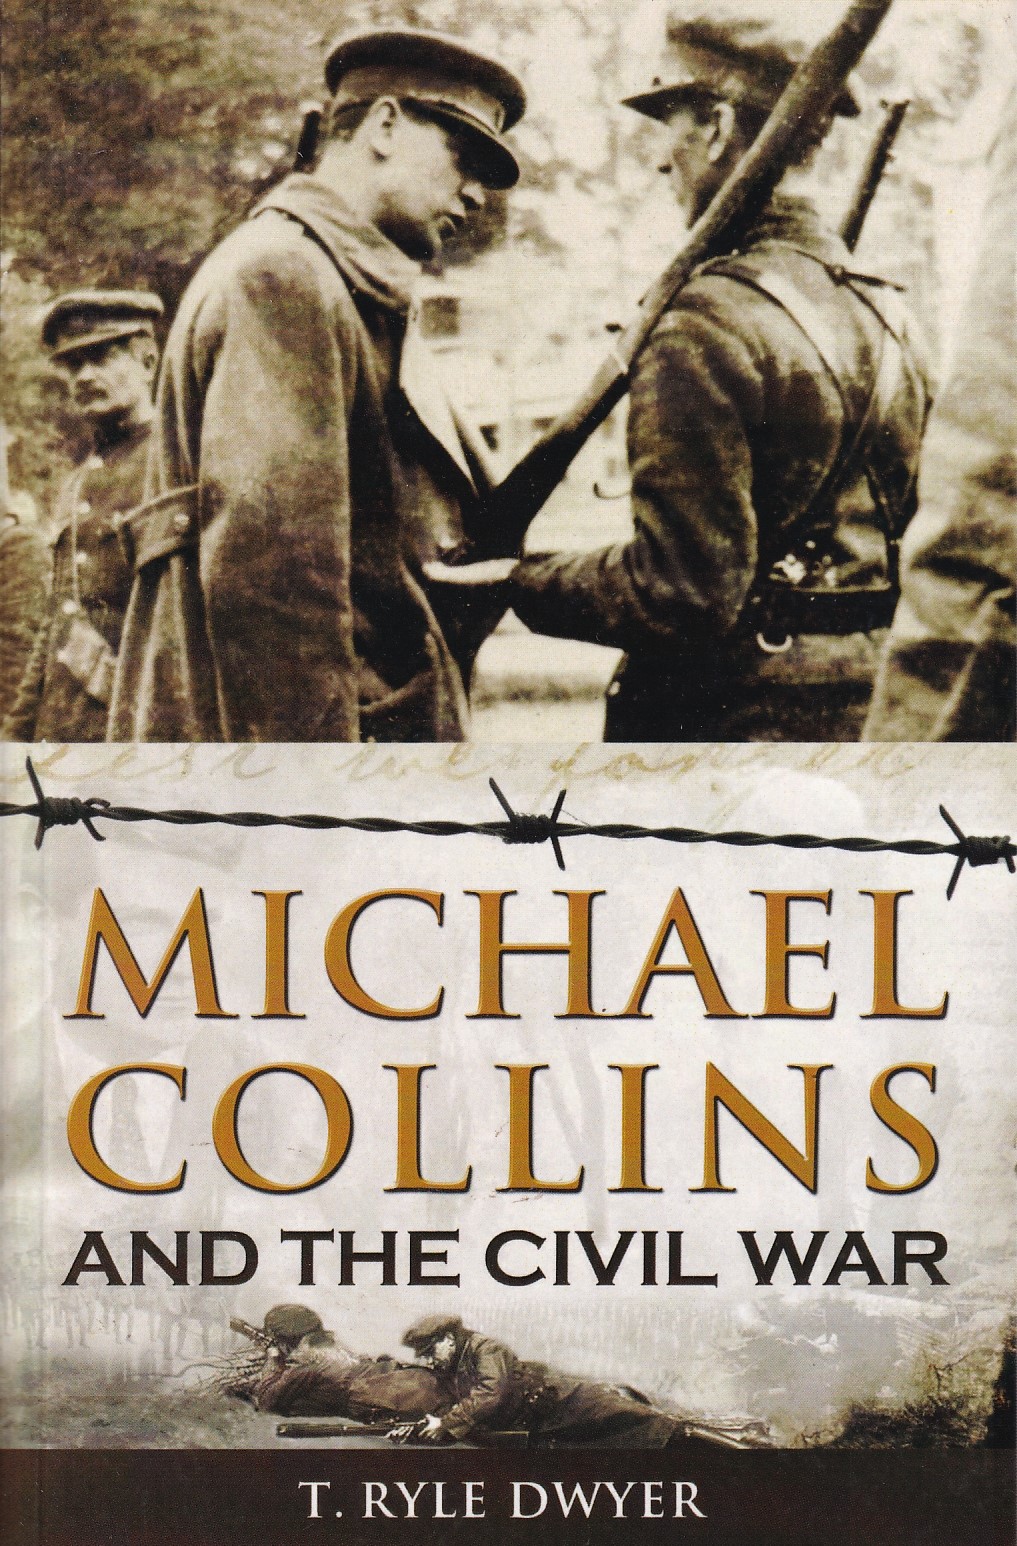 Michael Collins and The Civil War by T. Ryle Dwyer